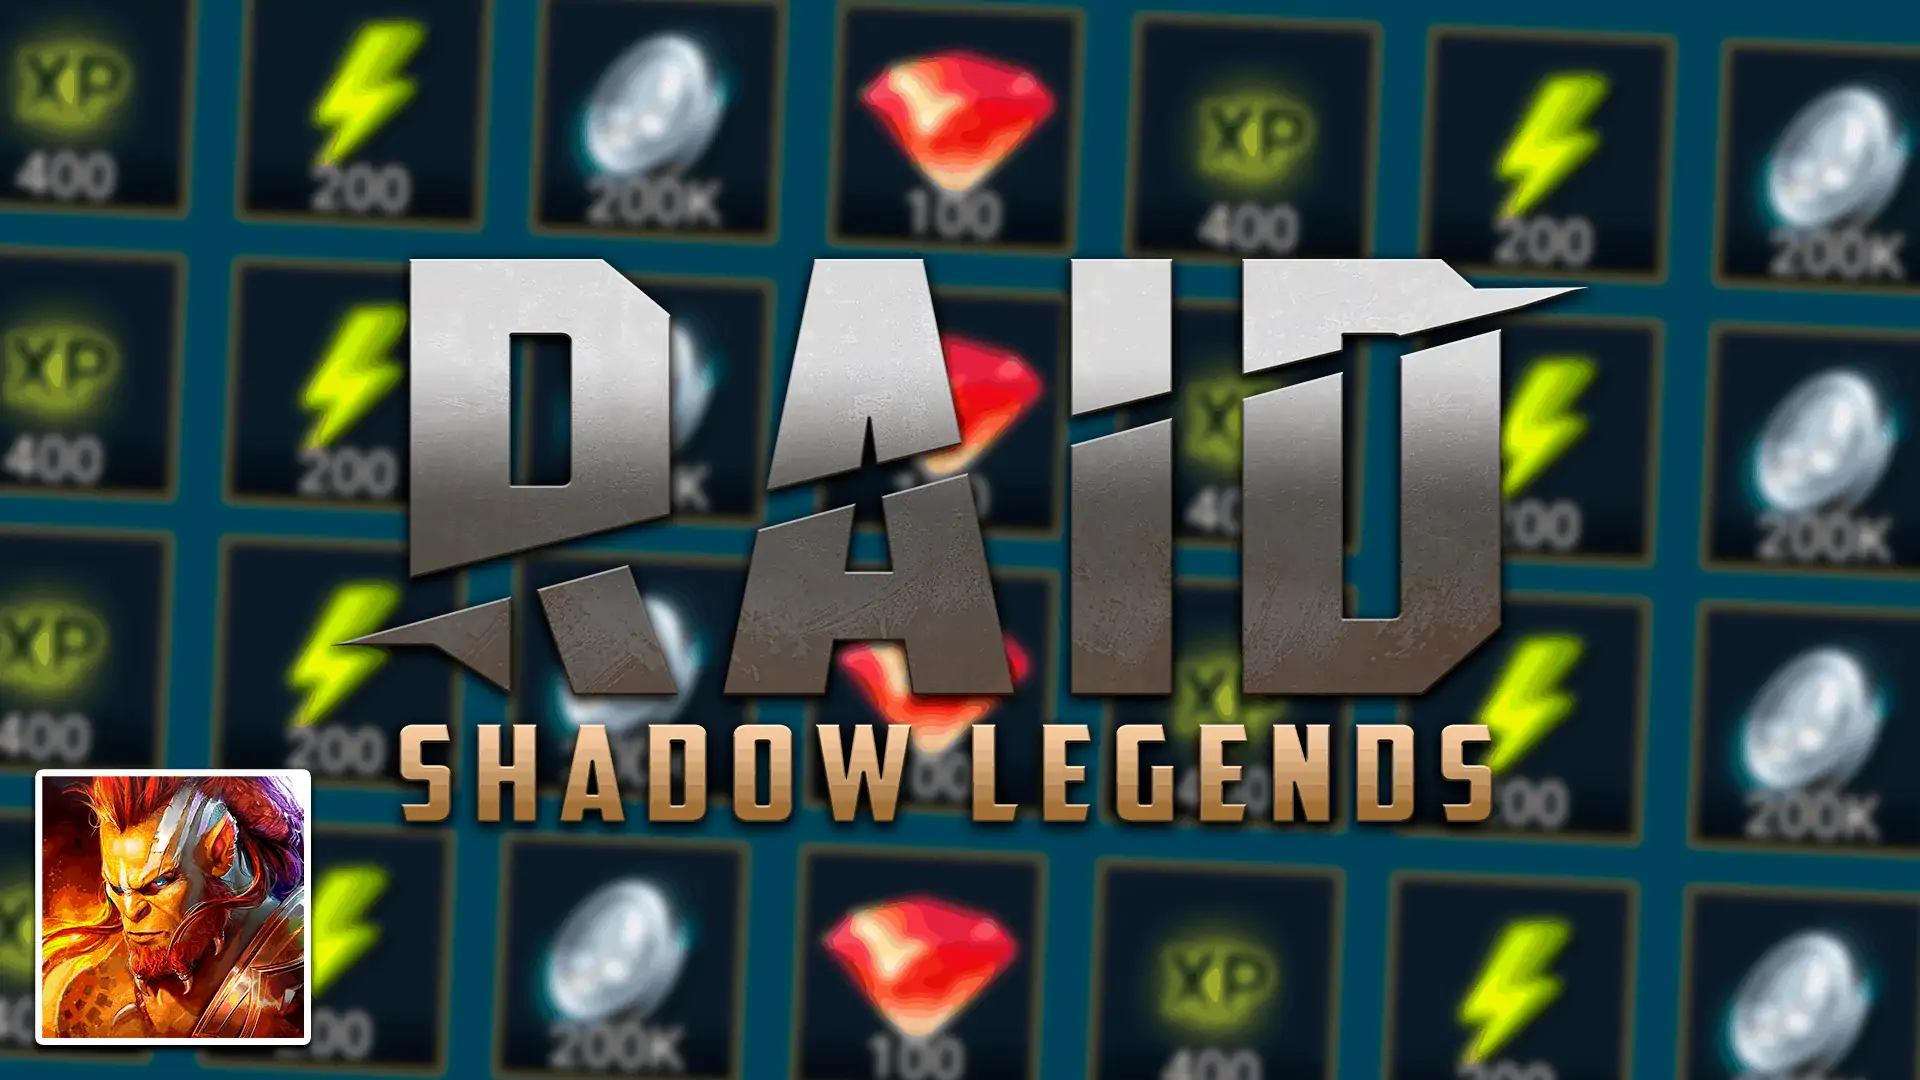 You are currently viewing RAID: Shadow Legends – How To Get Resources Guide (Chickens, Energy, Skill Tomes, etc.)